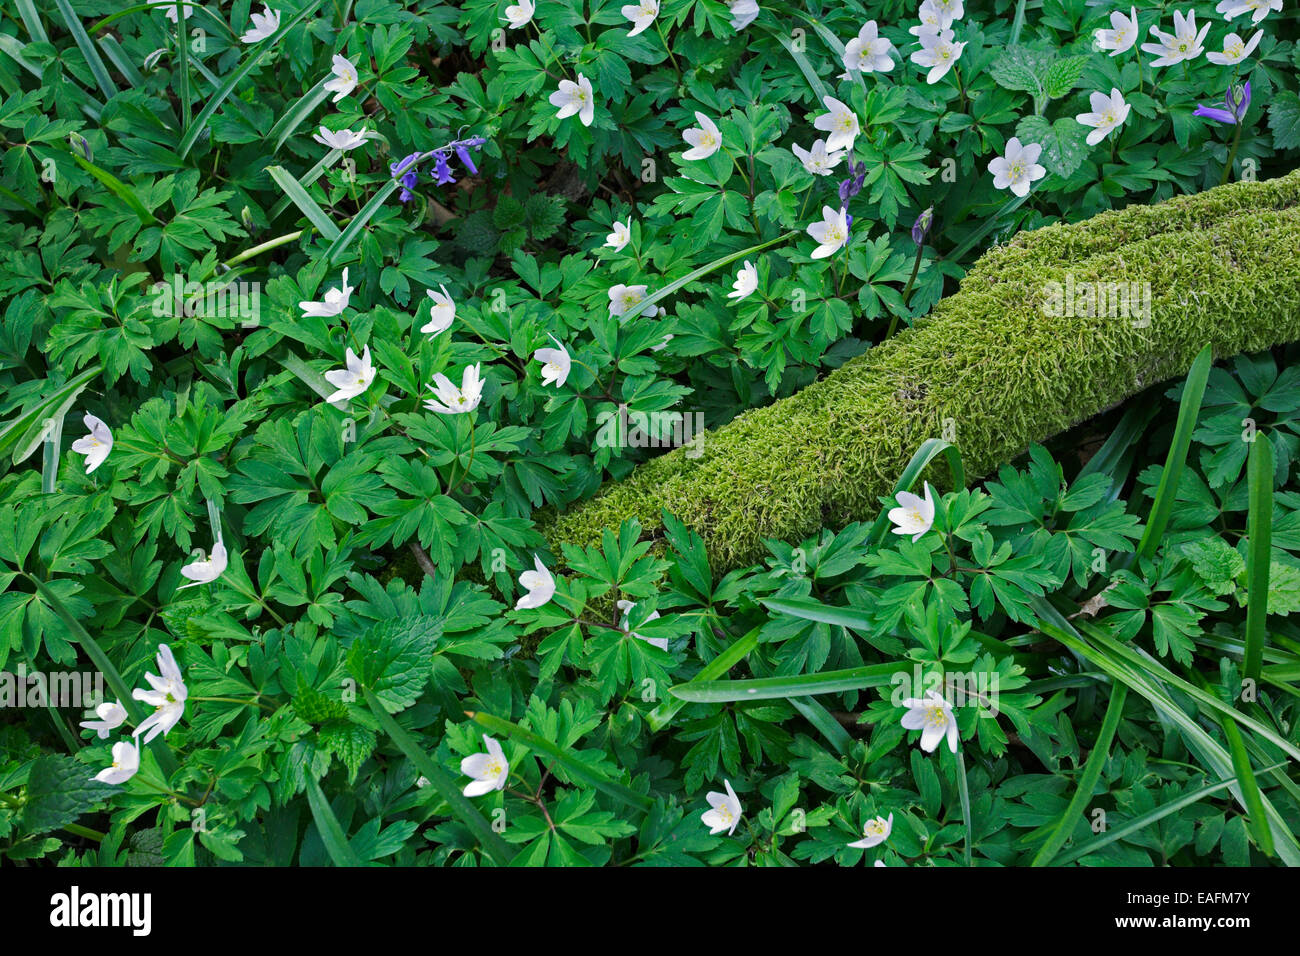 Wood Anemones and Bluebells growing on the forest floor. Stock Photo